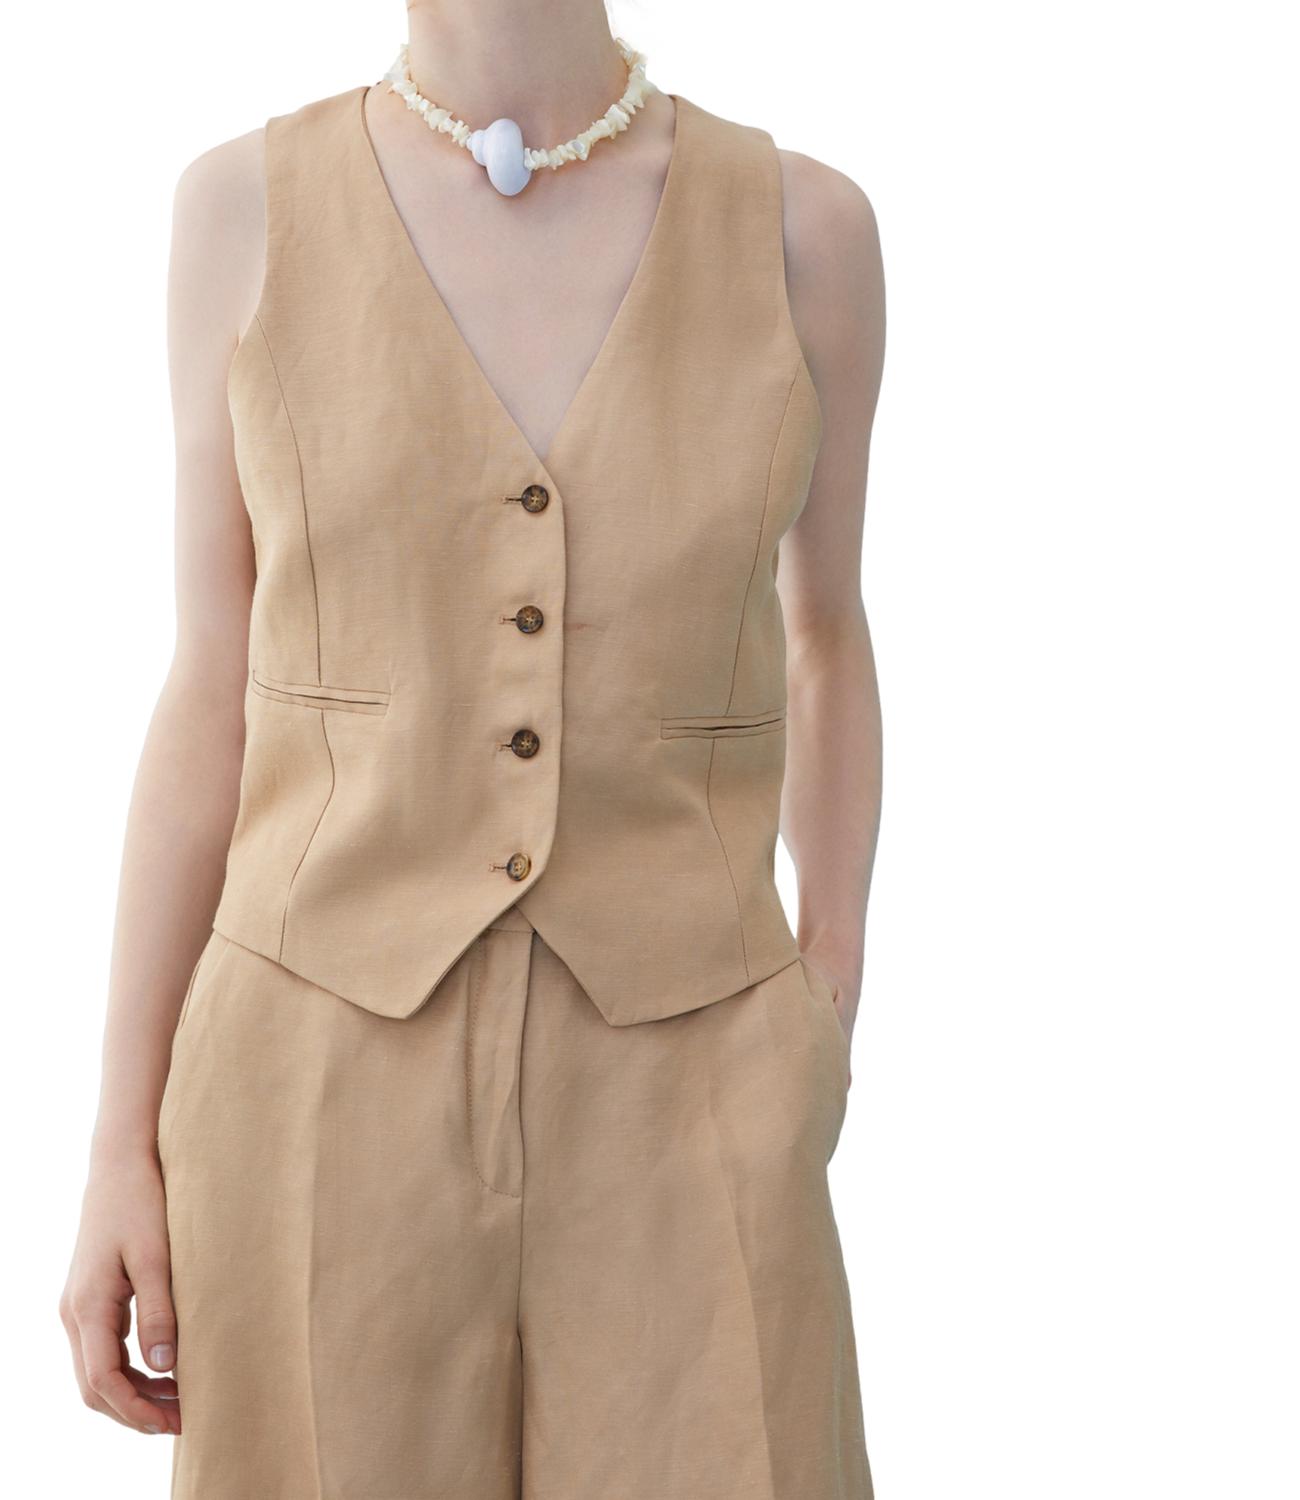 Iblues gilet ANGY beige donna